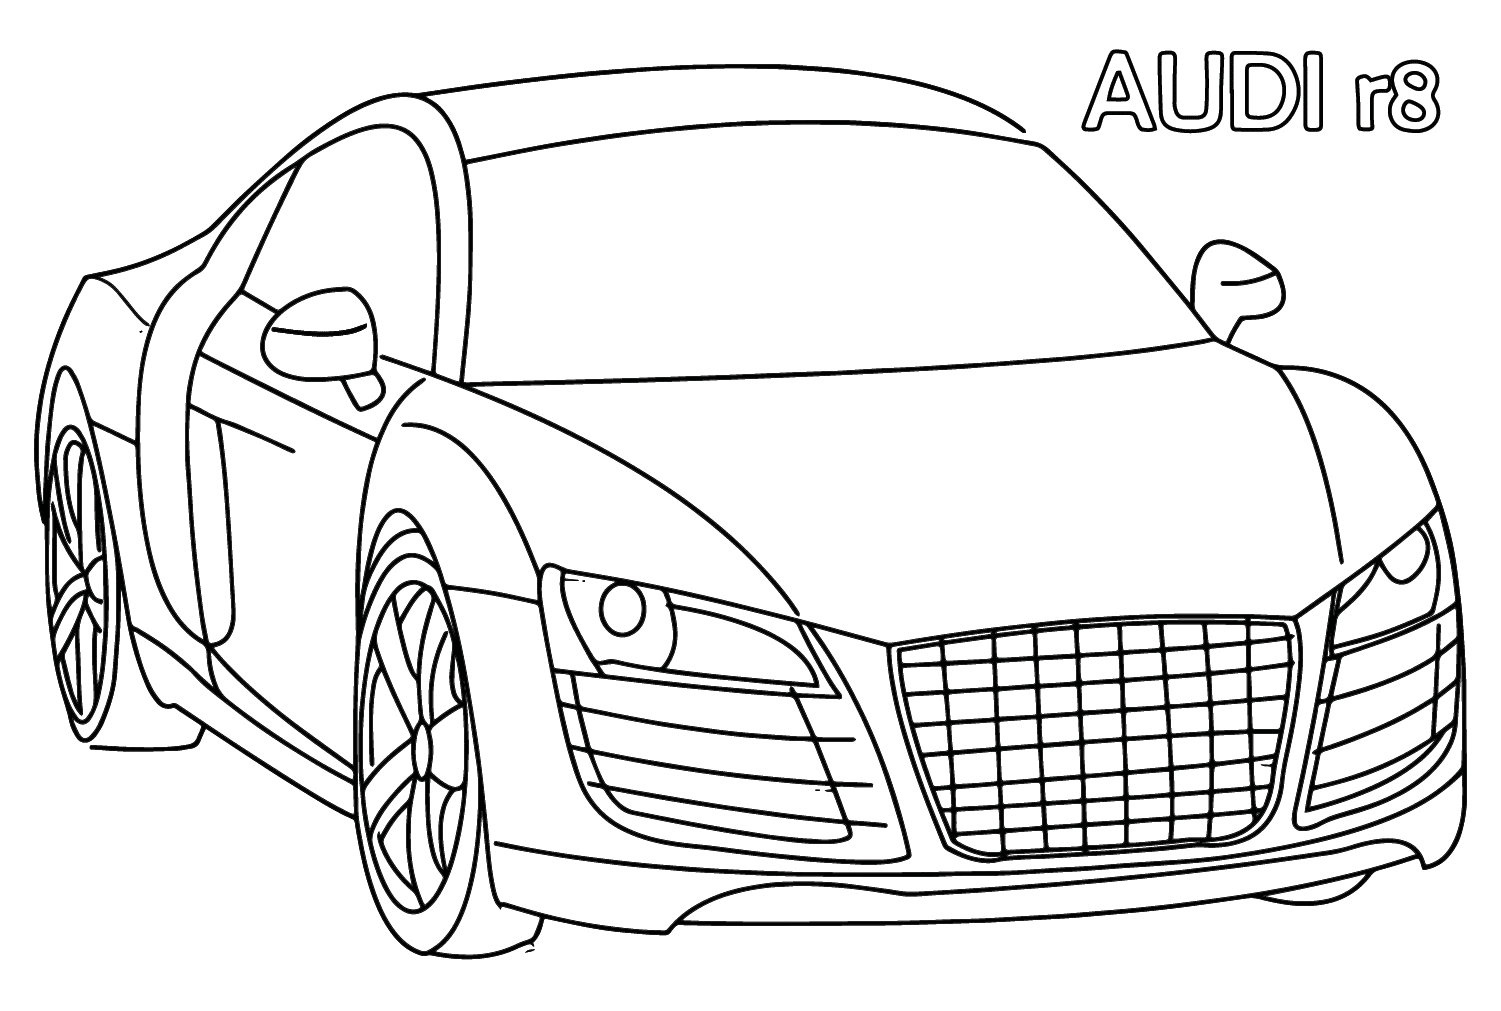 Audi R8 Coloring Page - Free Printable Coloring Pages